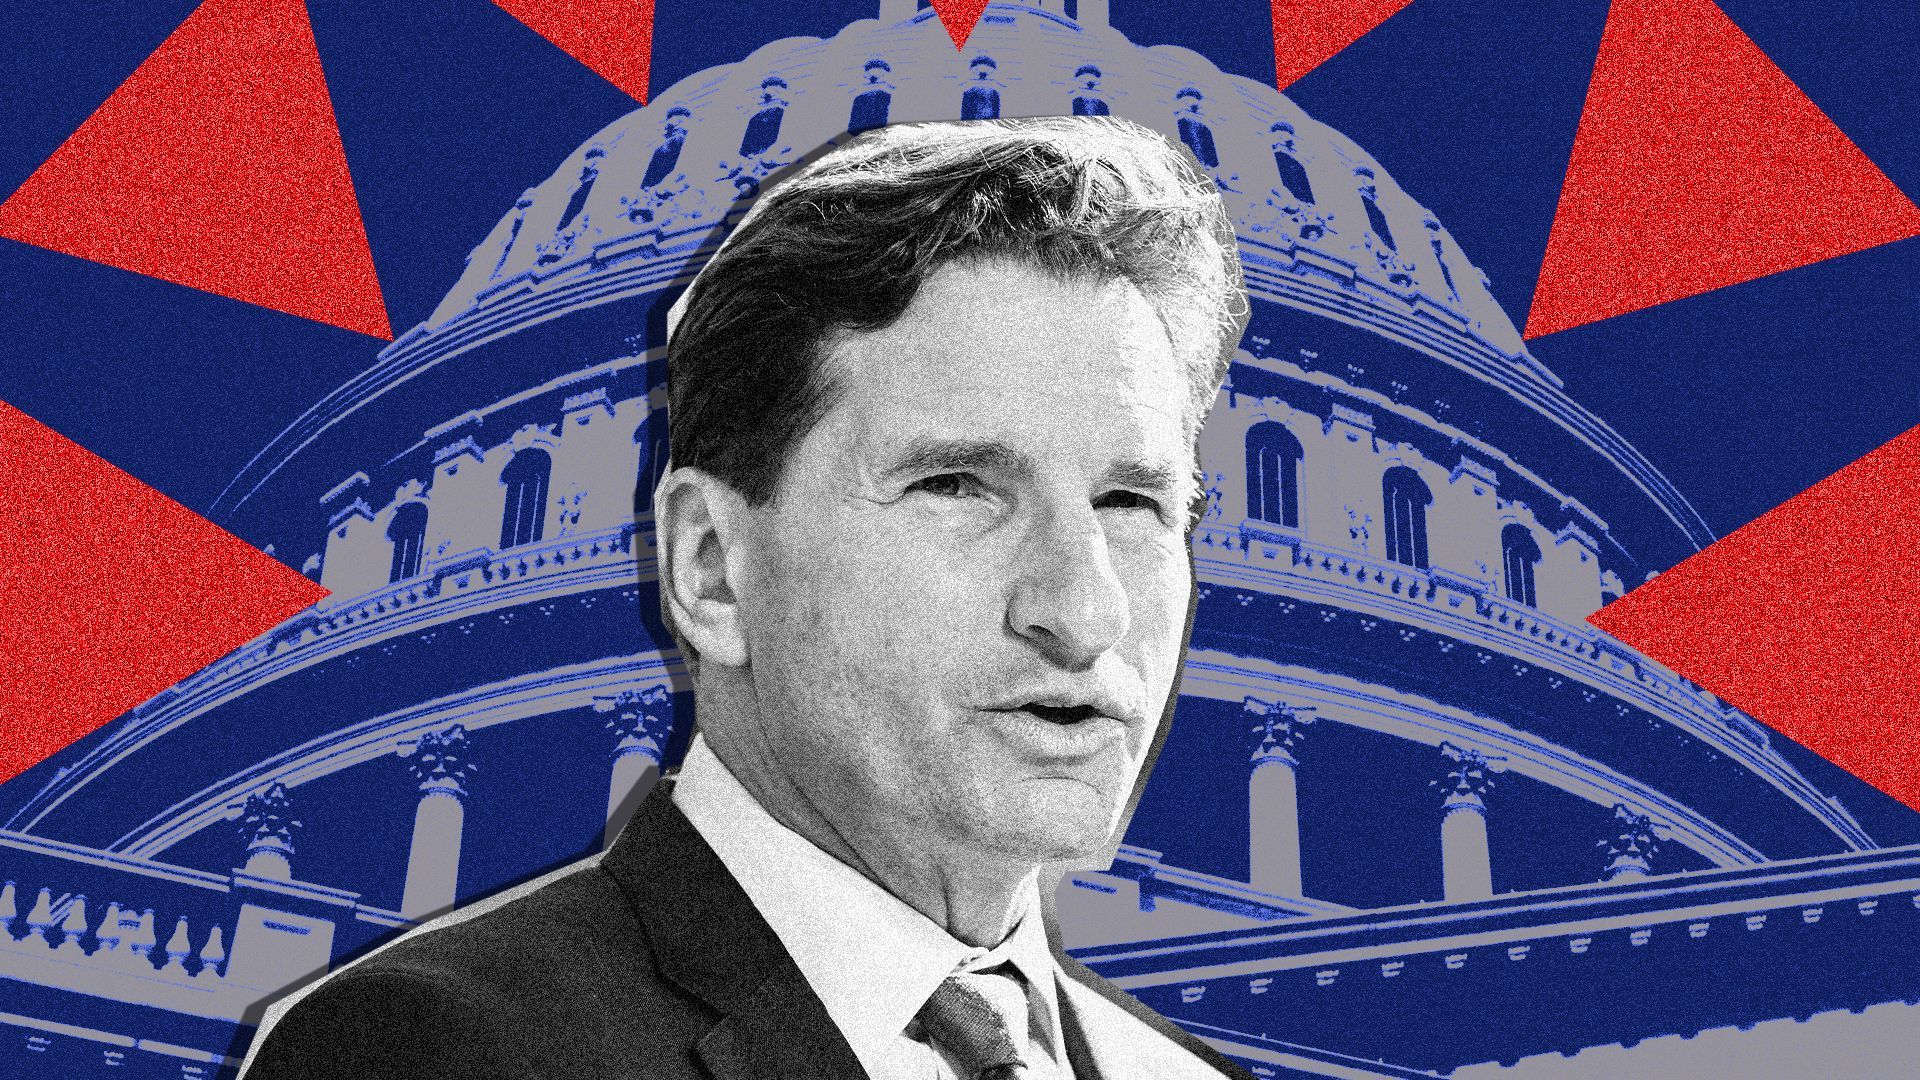 Photo illustration of U.S. Rep. Dean Phillips in front of the Capitol Building, surrounded by triangles pointing towards him.